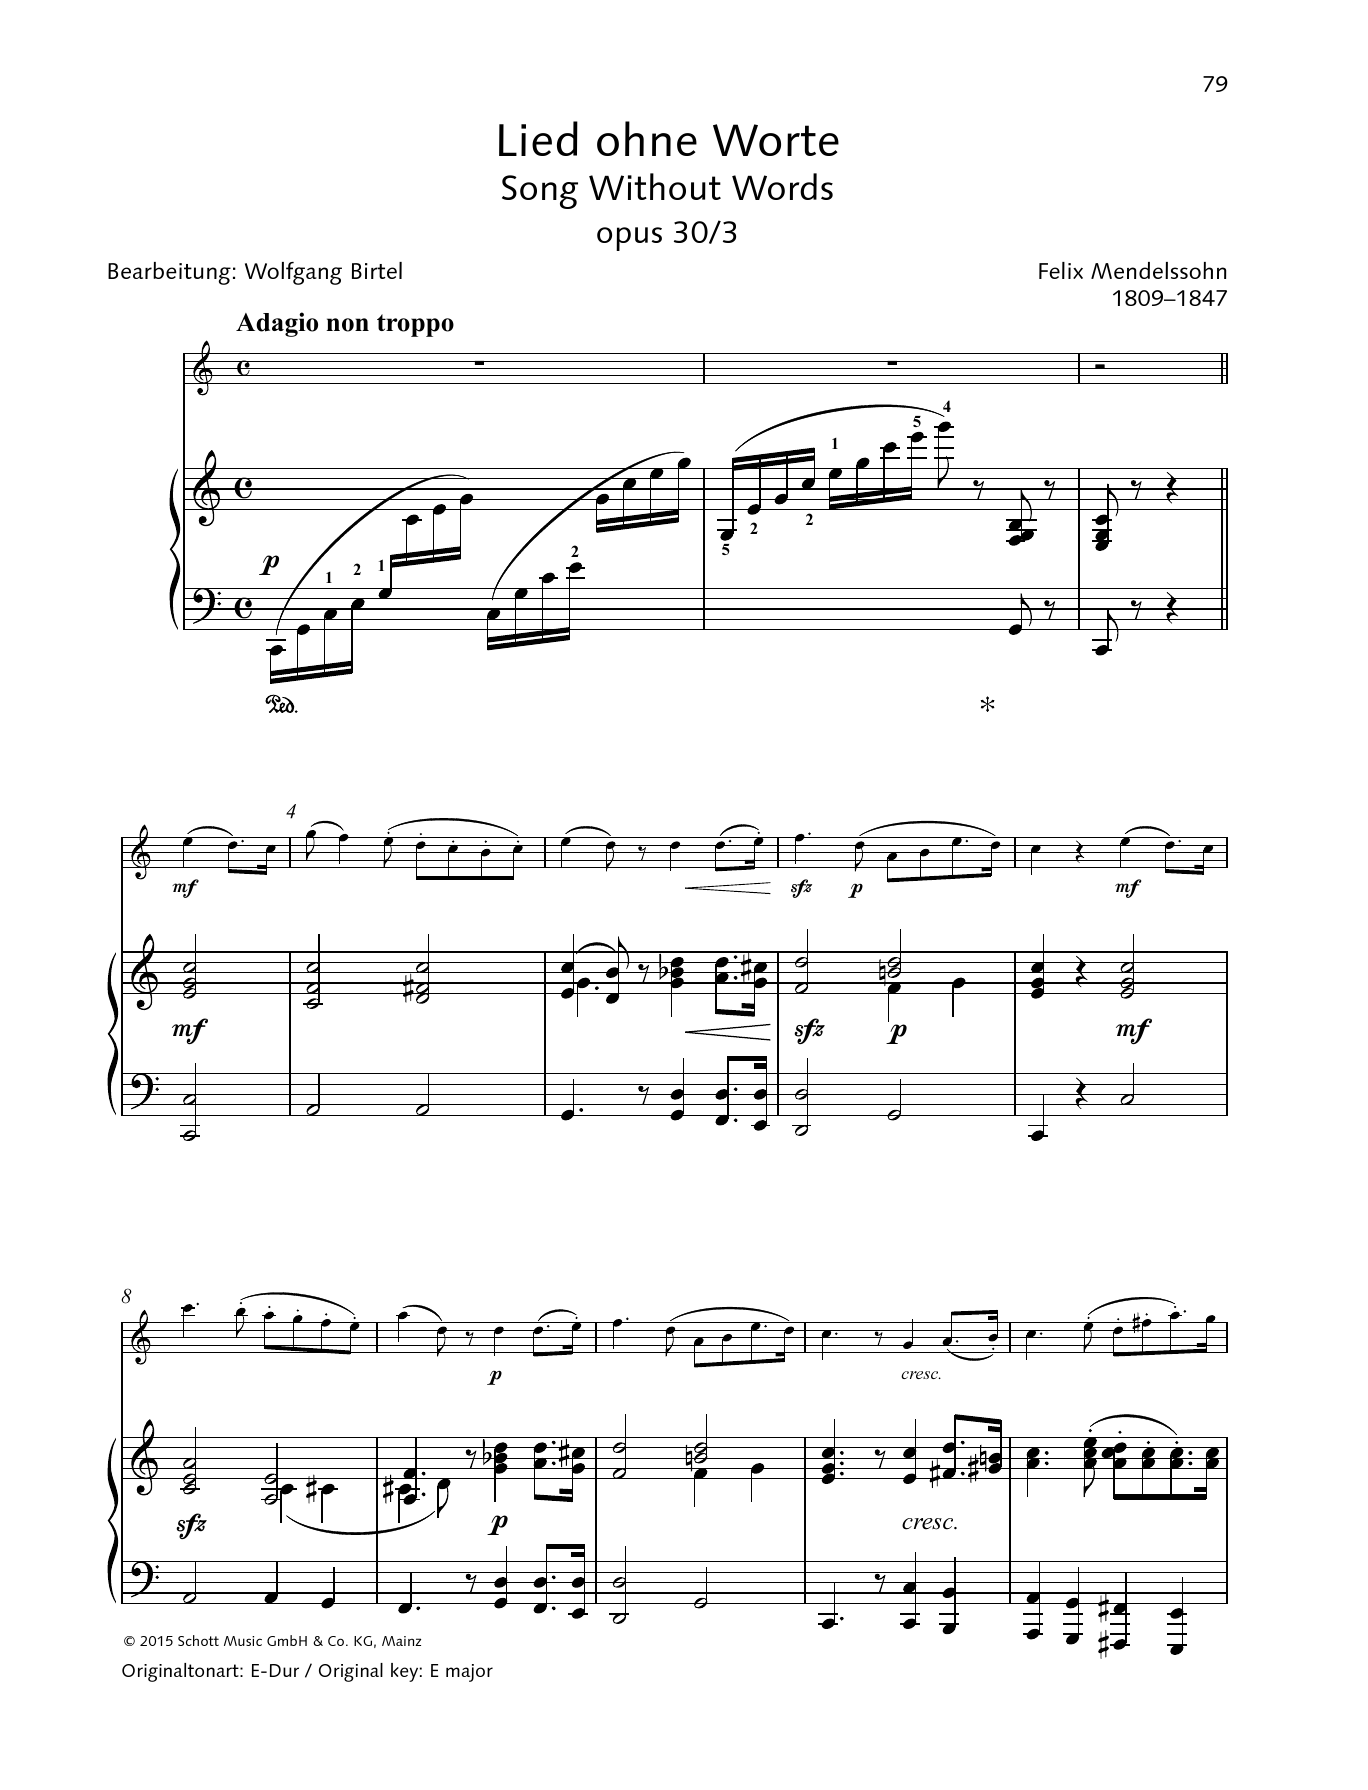 Song Without Words (String Solo) von Felix Mendelssohn Bartholdy